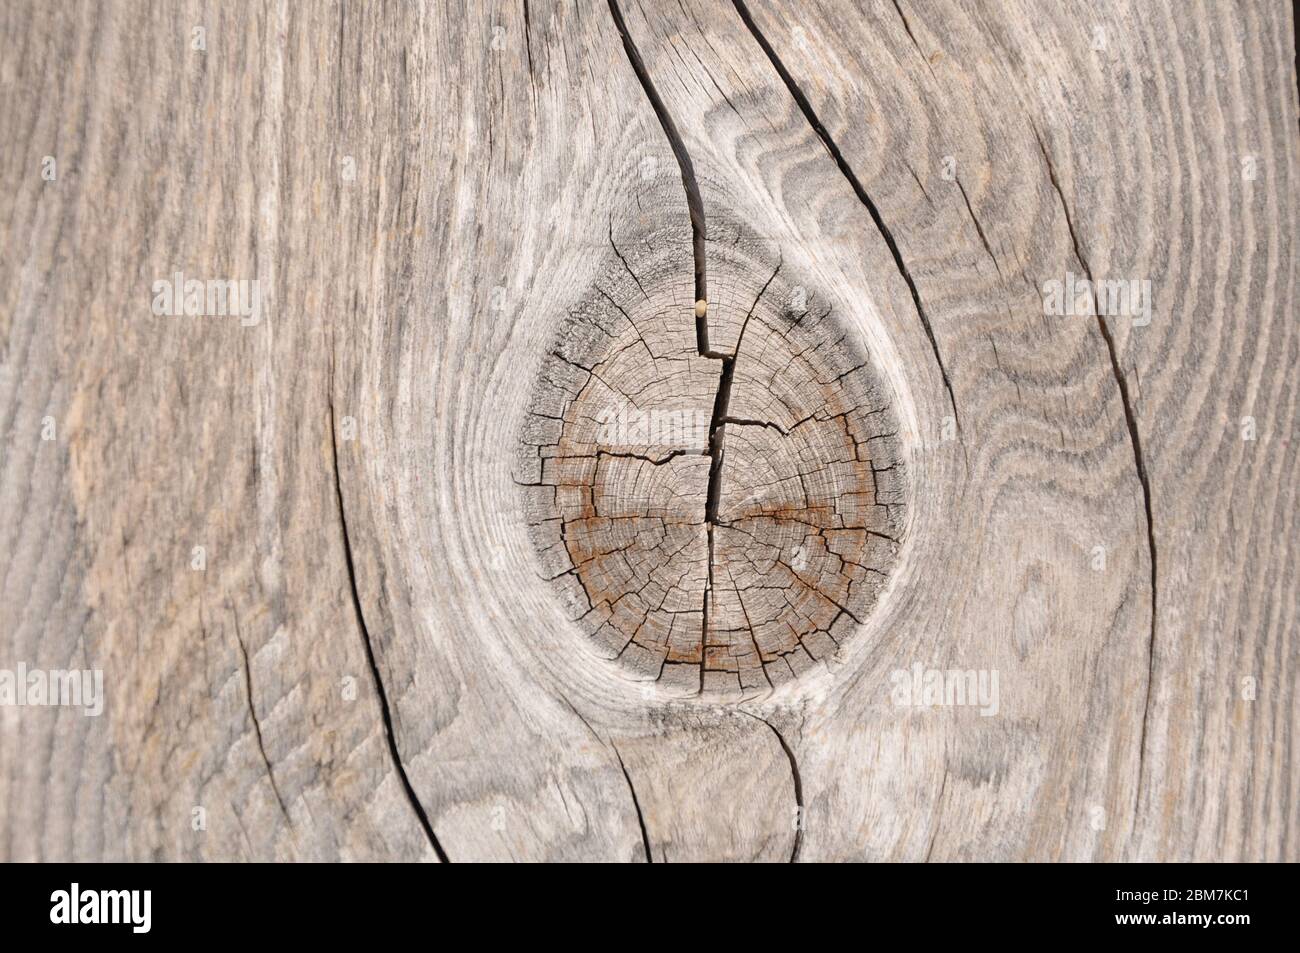 Wooden desk knot. Wood texture plank grain timber background.Knot on a gray board Stock Photo